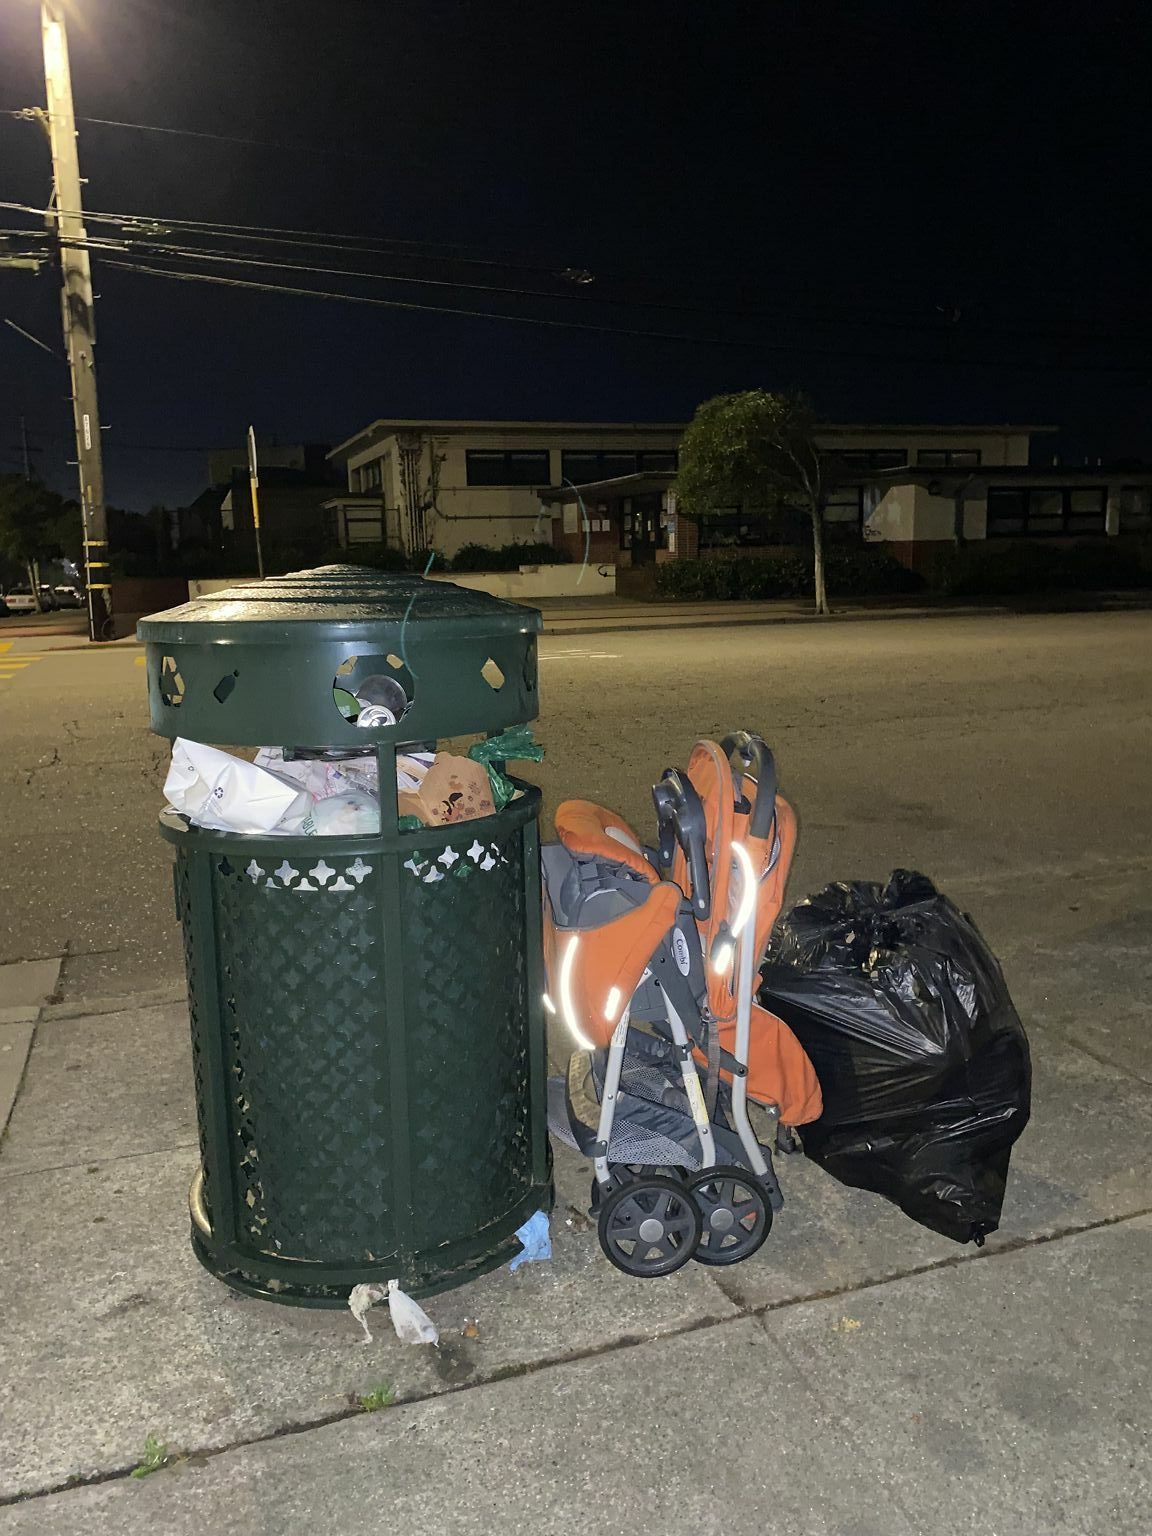 A stroller and a black bag of trash sit on the ground next to a public trash can.